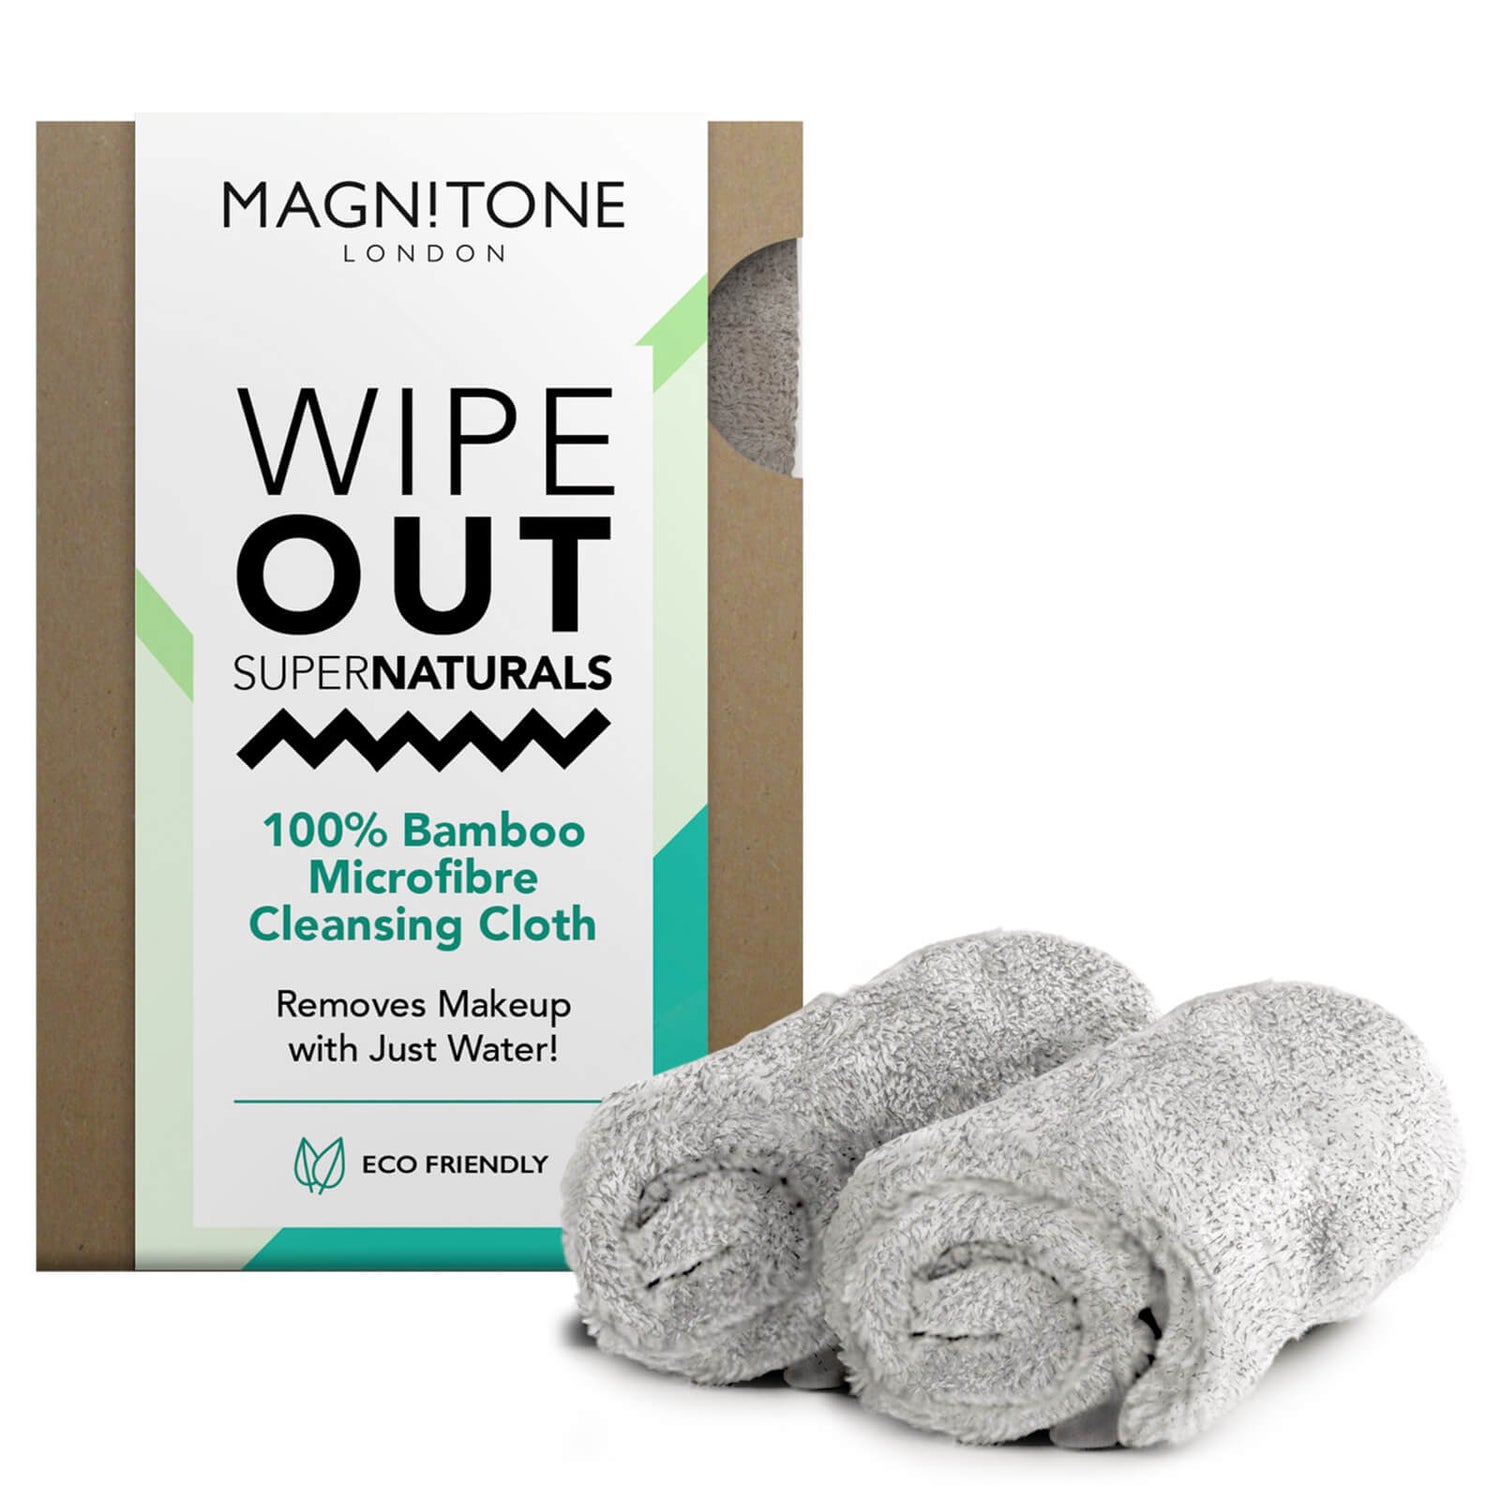 MAGNITONE London WipeOut SuperNatural Bamboo MicroFibre Cleansing Cloth 2 Pack - Grey